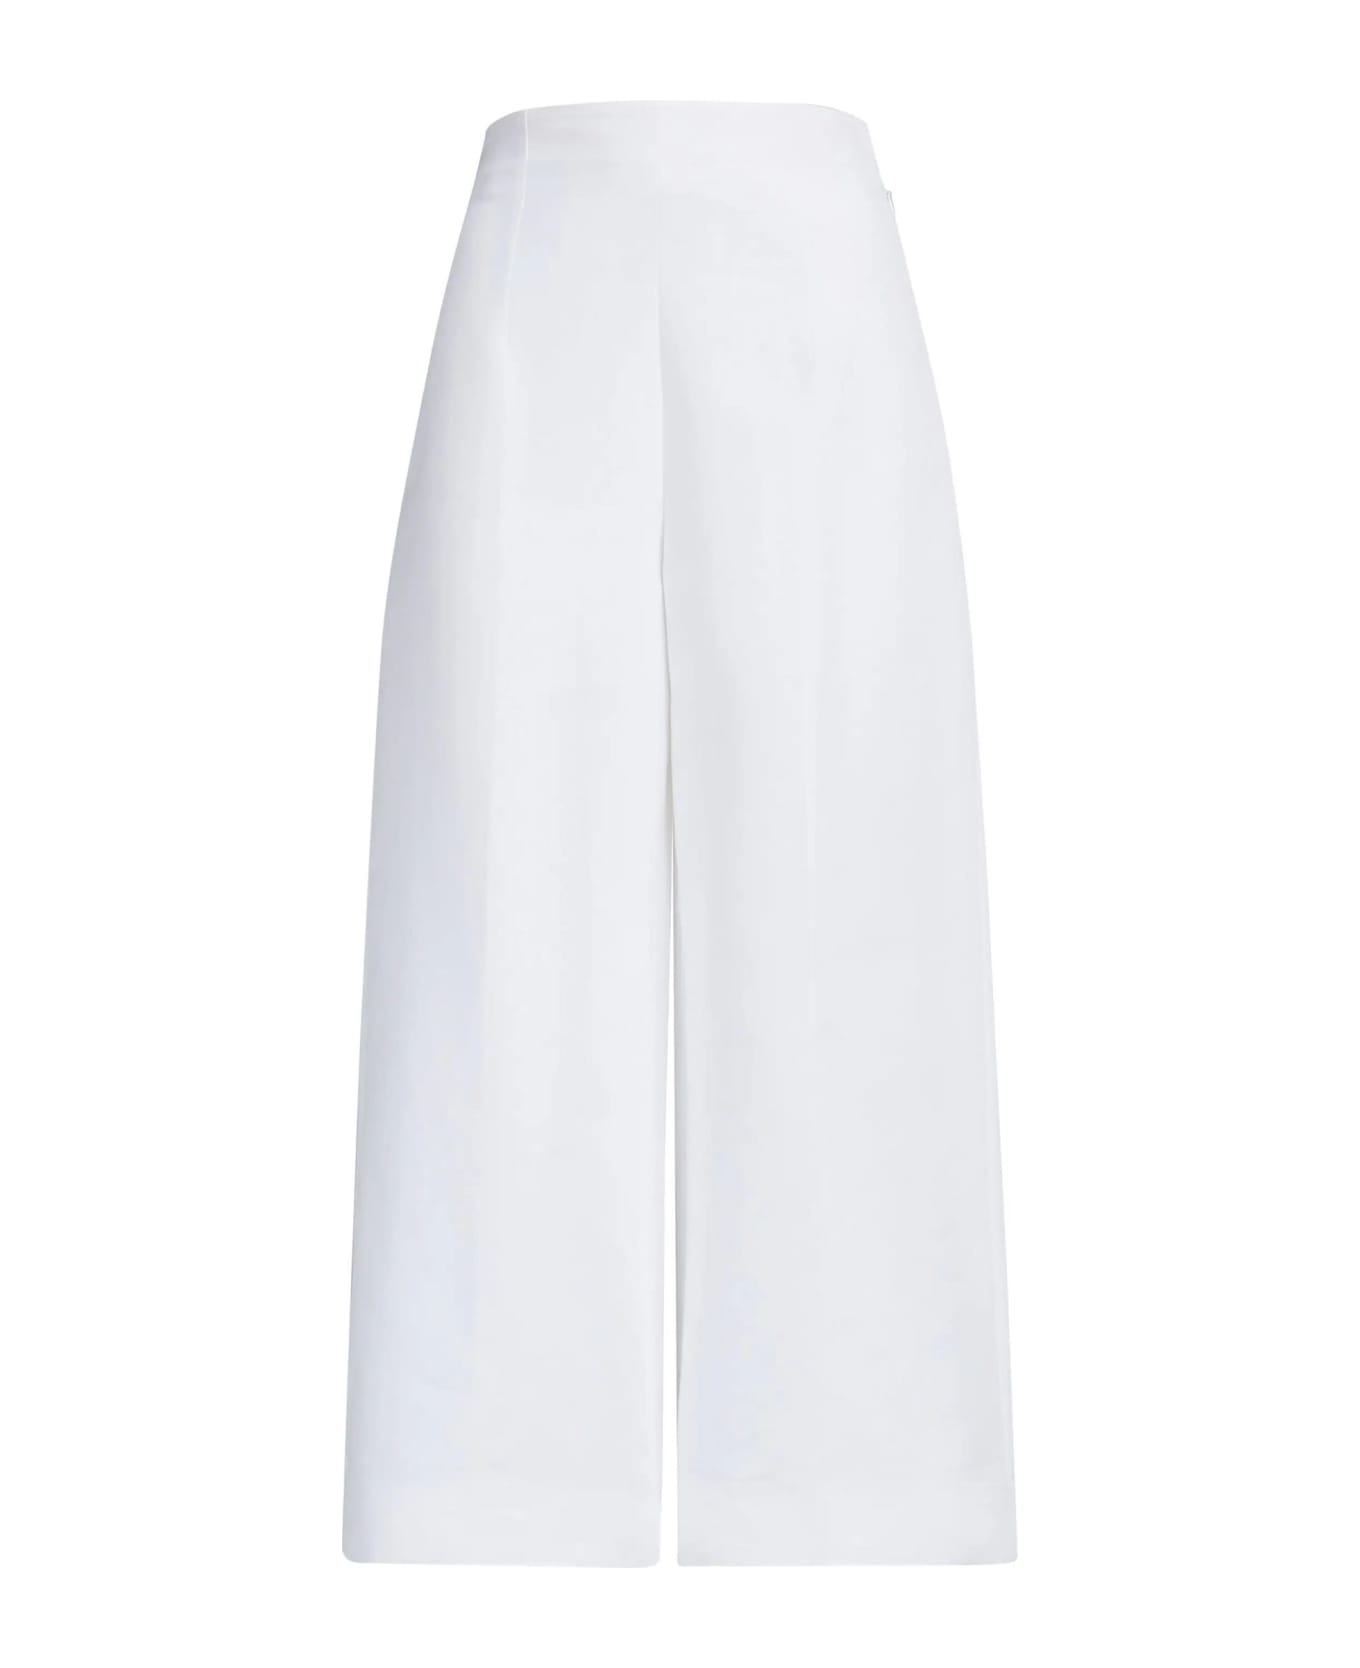 Marni Pressed Crease Cropped Trousers - White